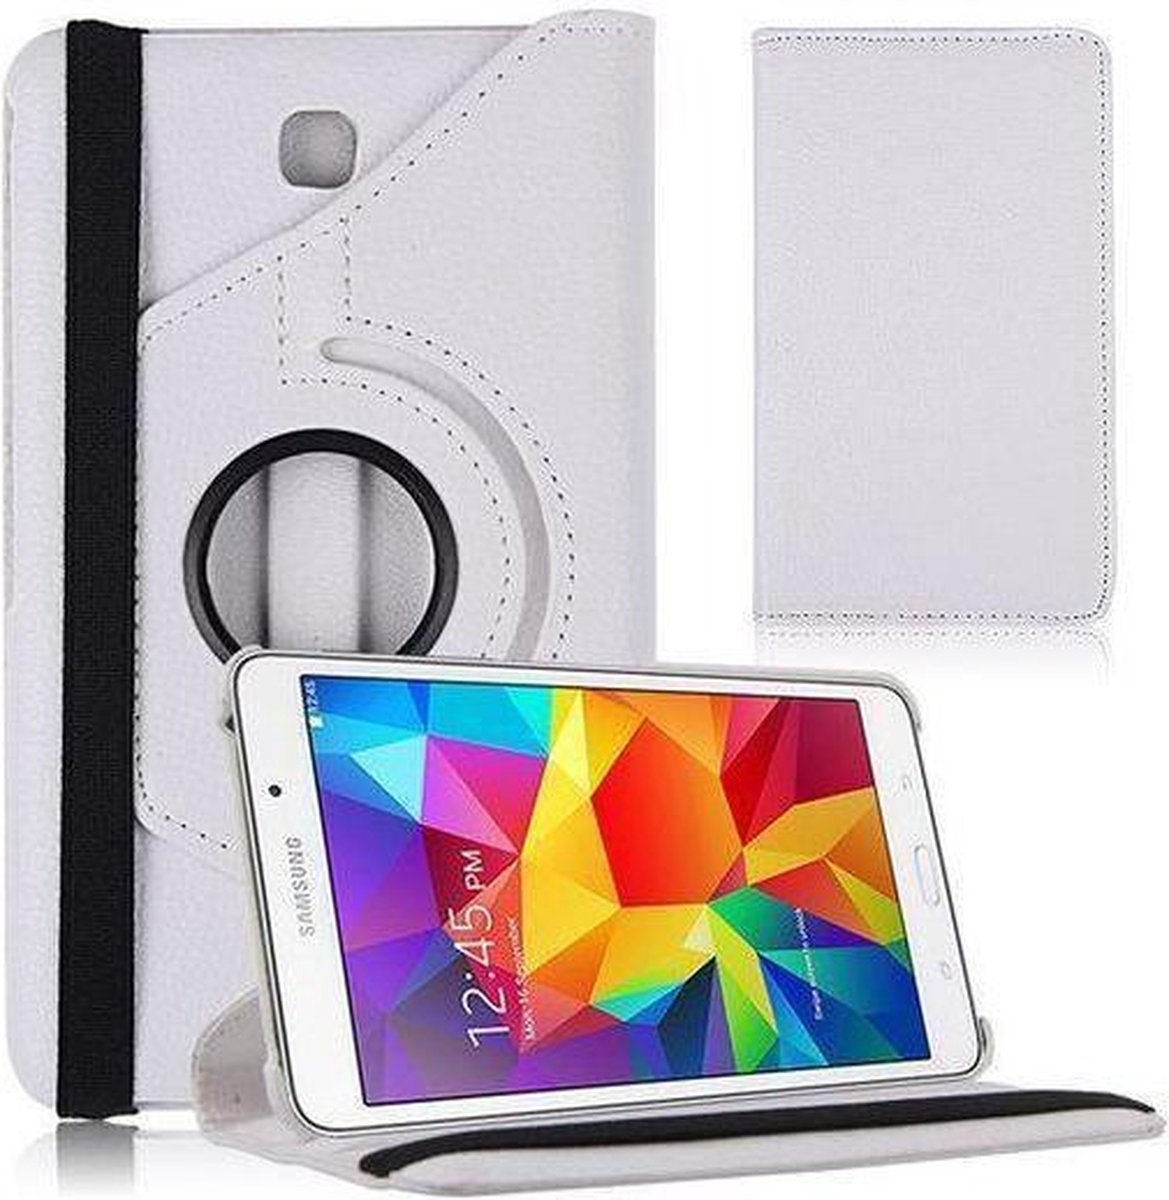 Samsung Galaxy Tab 4 7.0 Inch Hoes Cover 360 graden draaibare Case Wit